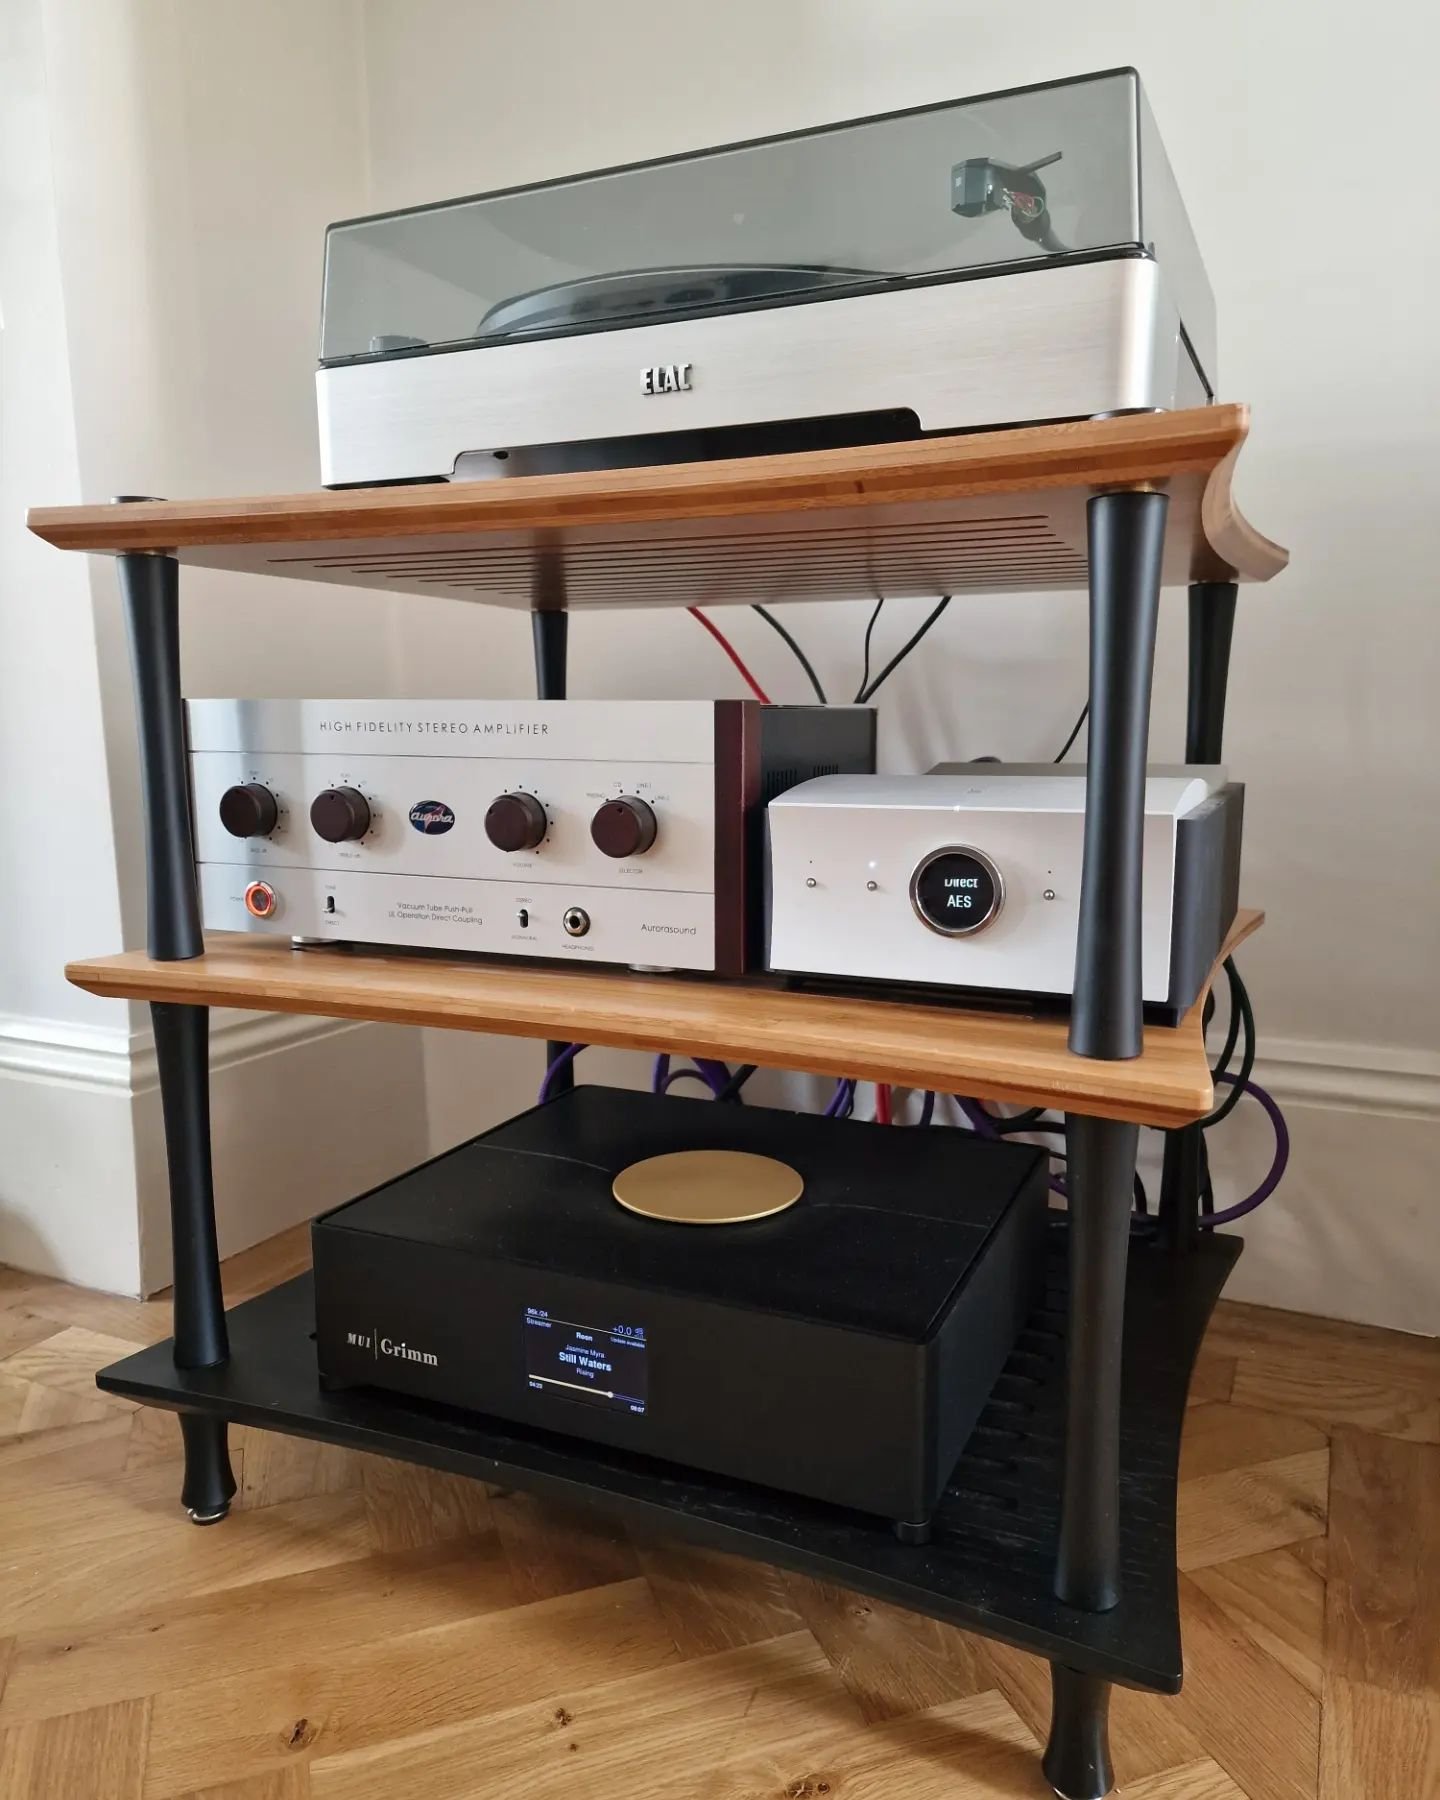 Another of our demo systems at VAL HiFi is a pair of Boenicke W5 loudspeakers fed by the Aurorasound HFSA-01 integrated amplifier with dream team digital front end @grimmaudio MU1 and @molamola Tambaqui DAC. This ELAC turntable with Hana cartridge is